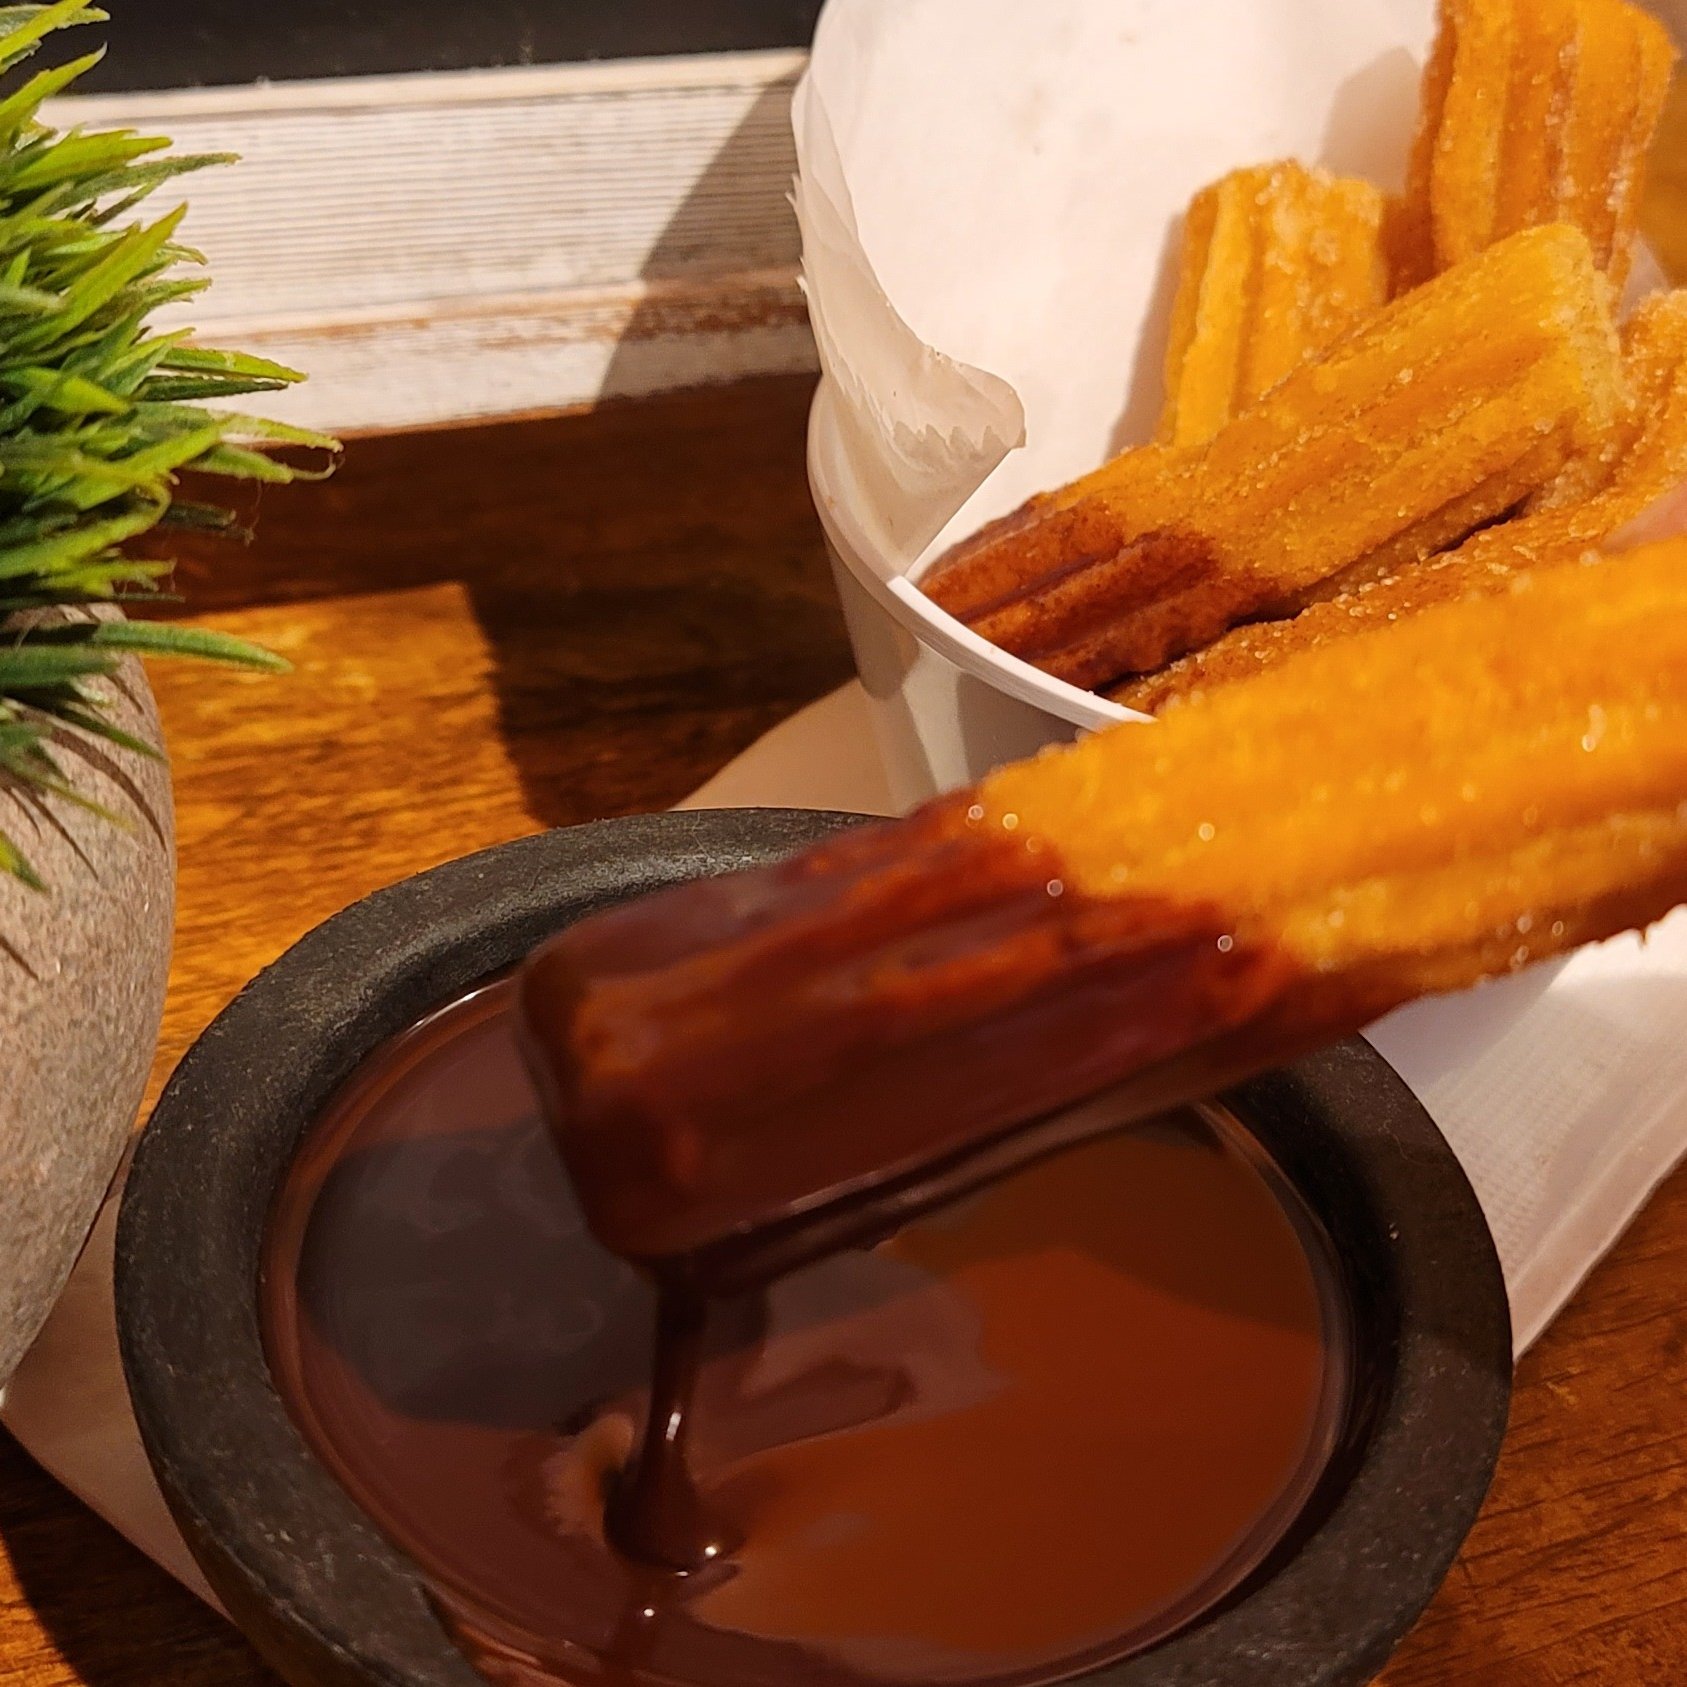 Churros with chocolate syrup